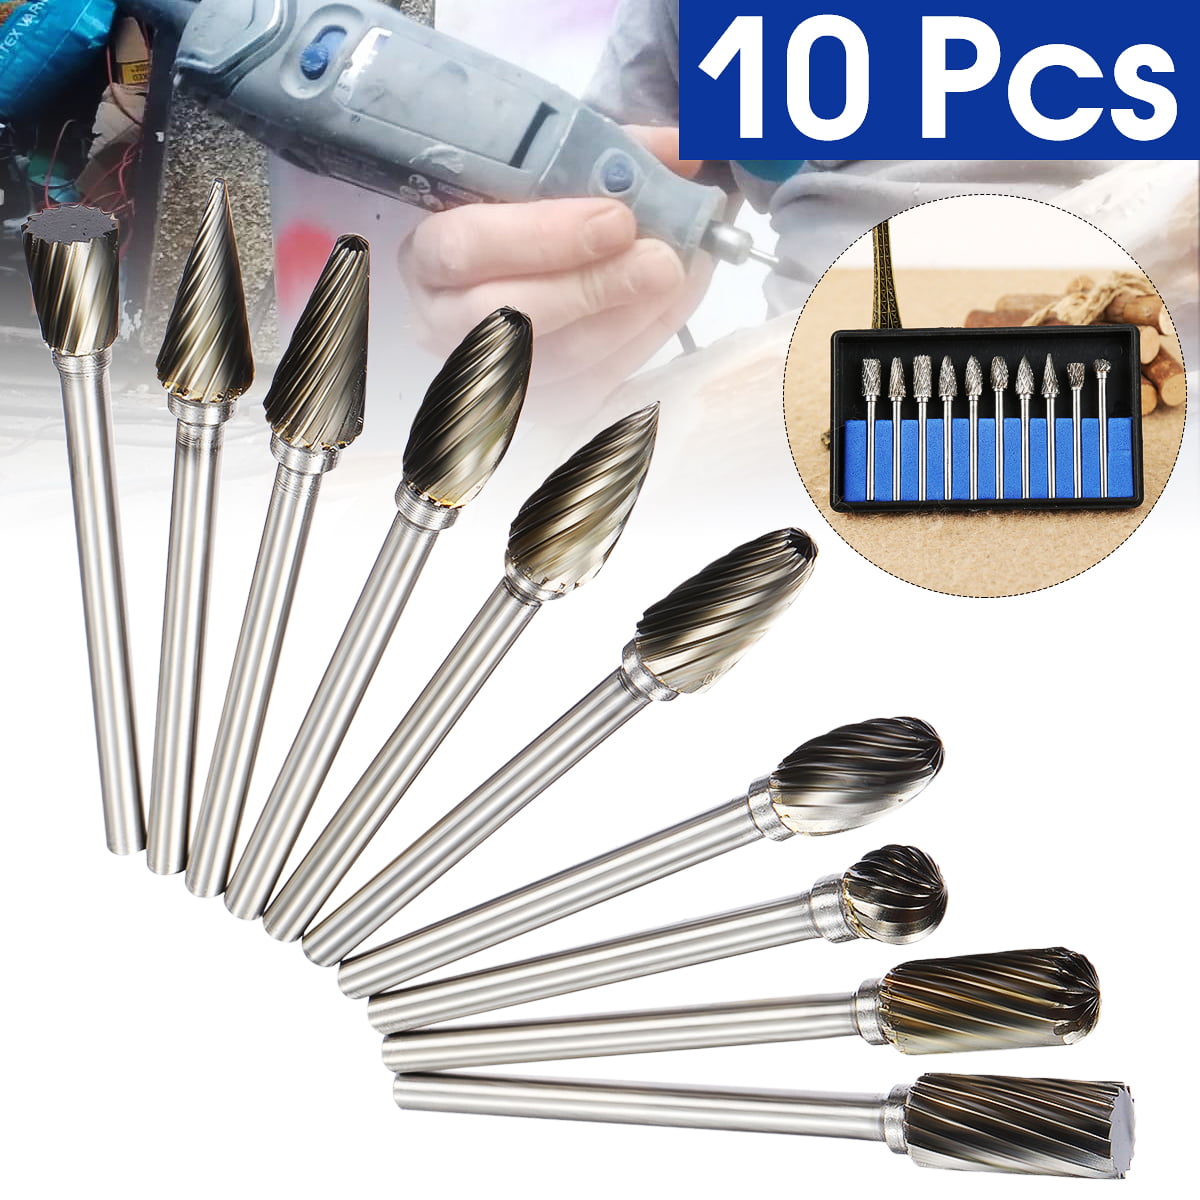 6pc Holesaw Cutting Cutter Hole Saw Dremel Rotary Die Grinder Router Drill Bit T 